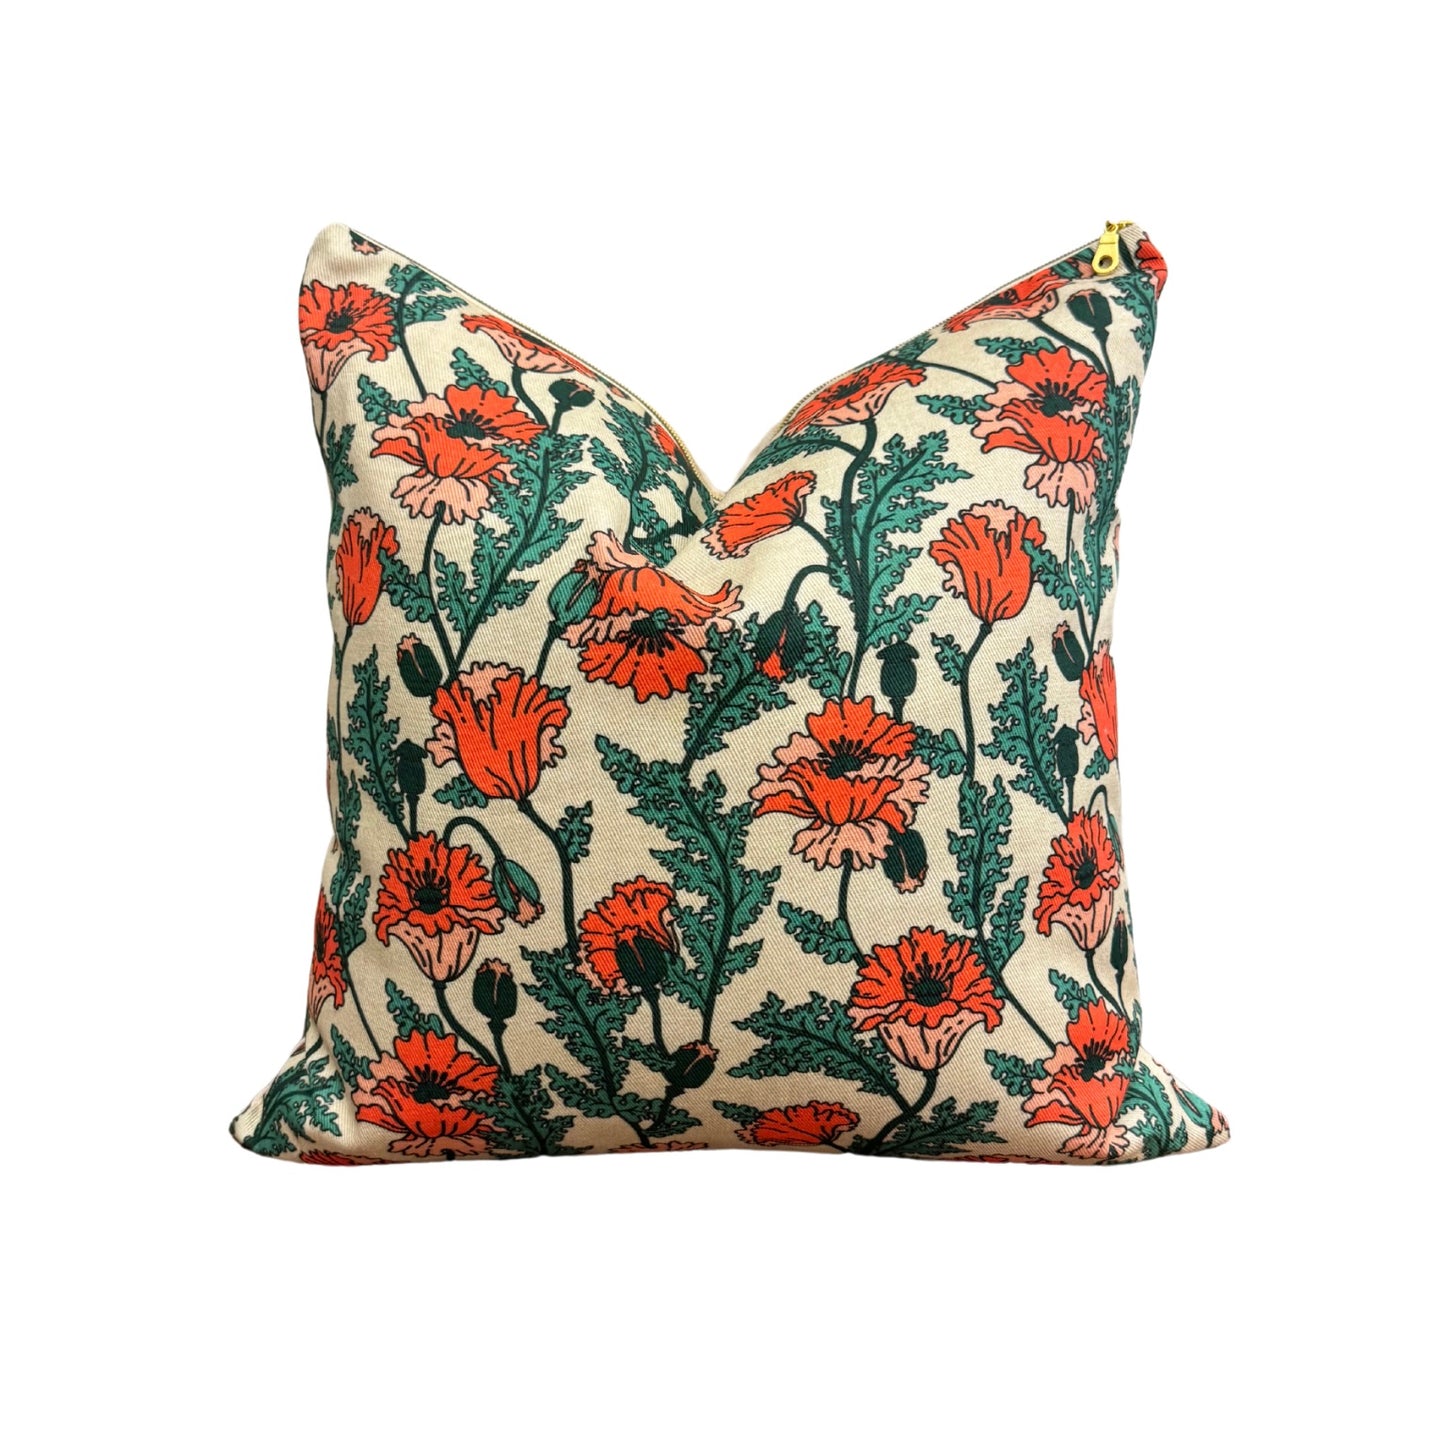 Joon Poppy Pillow Cover - Designed by Holli Zollinger